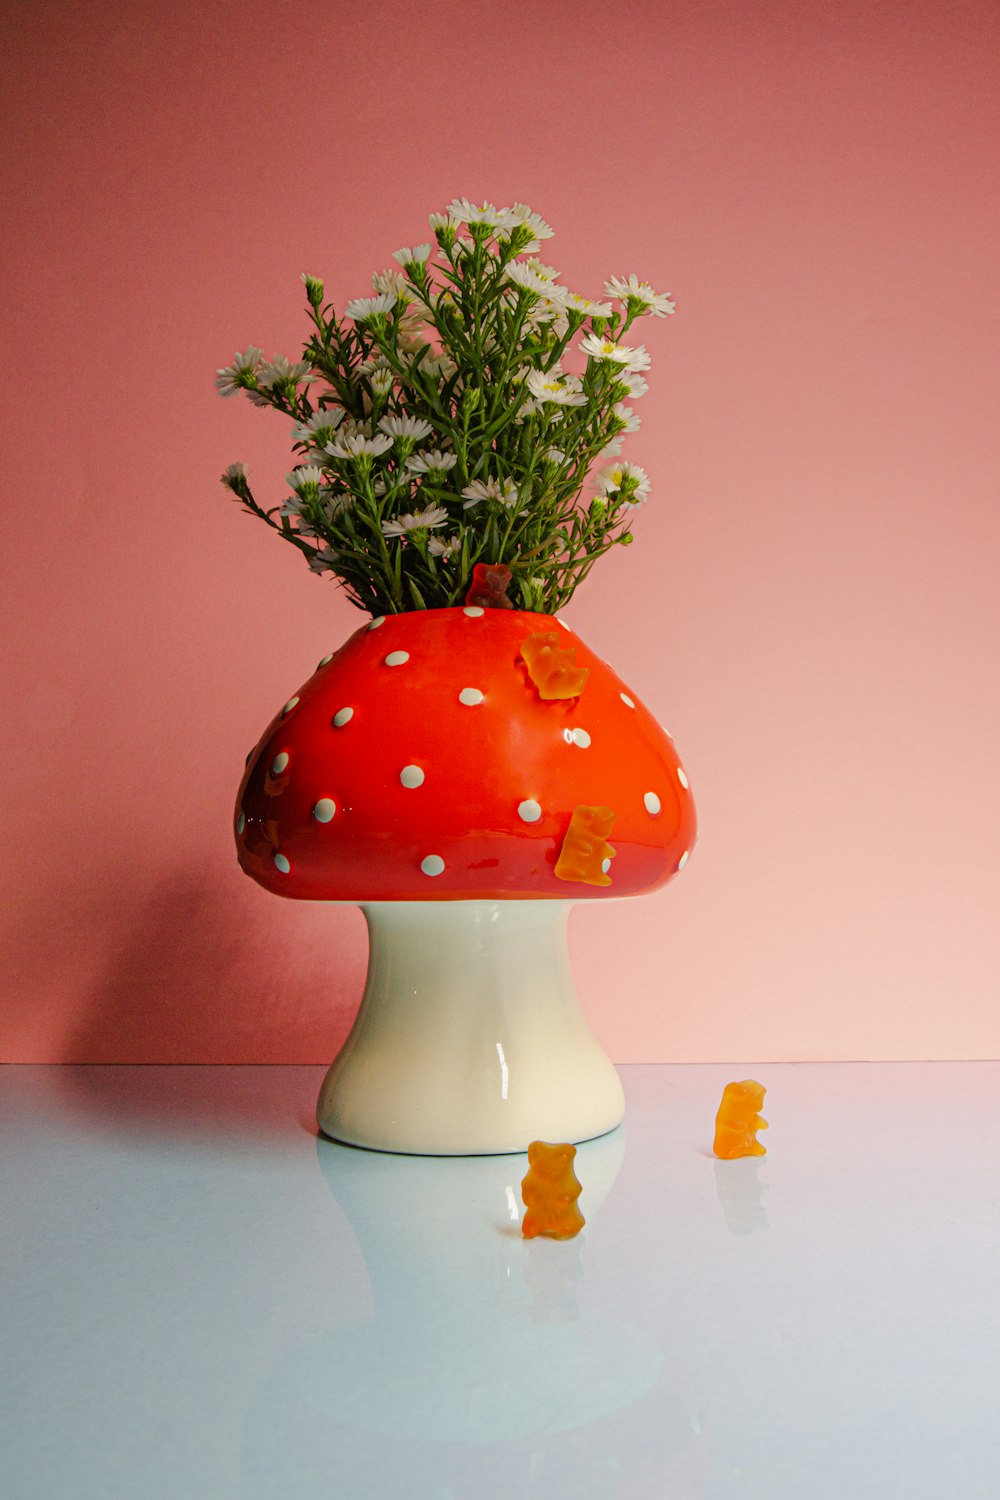 a mushroom shaped vase with flowers in it